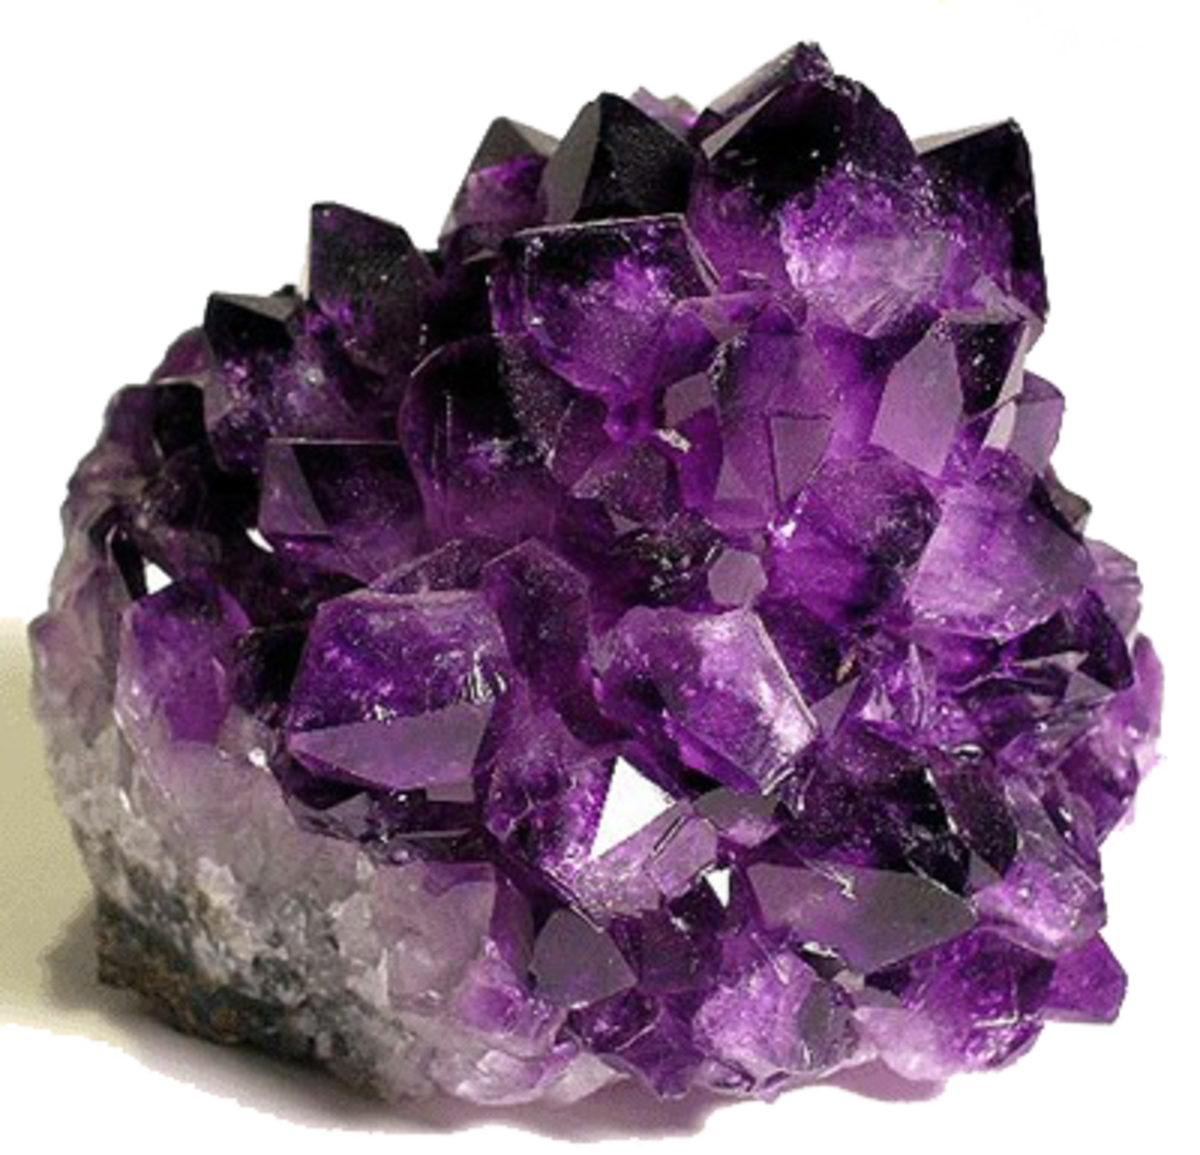 Amethyst download the new for mac